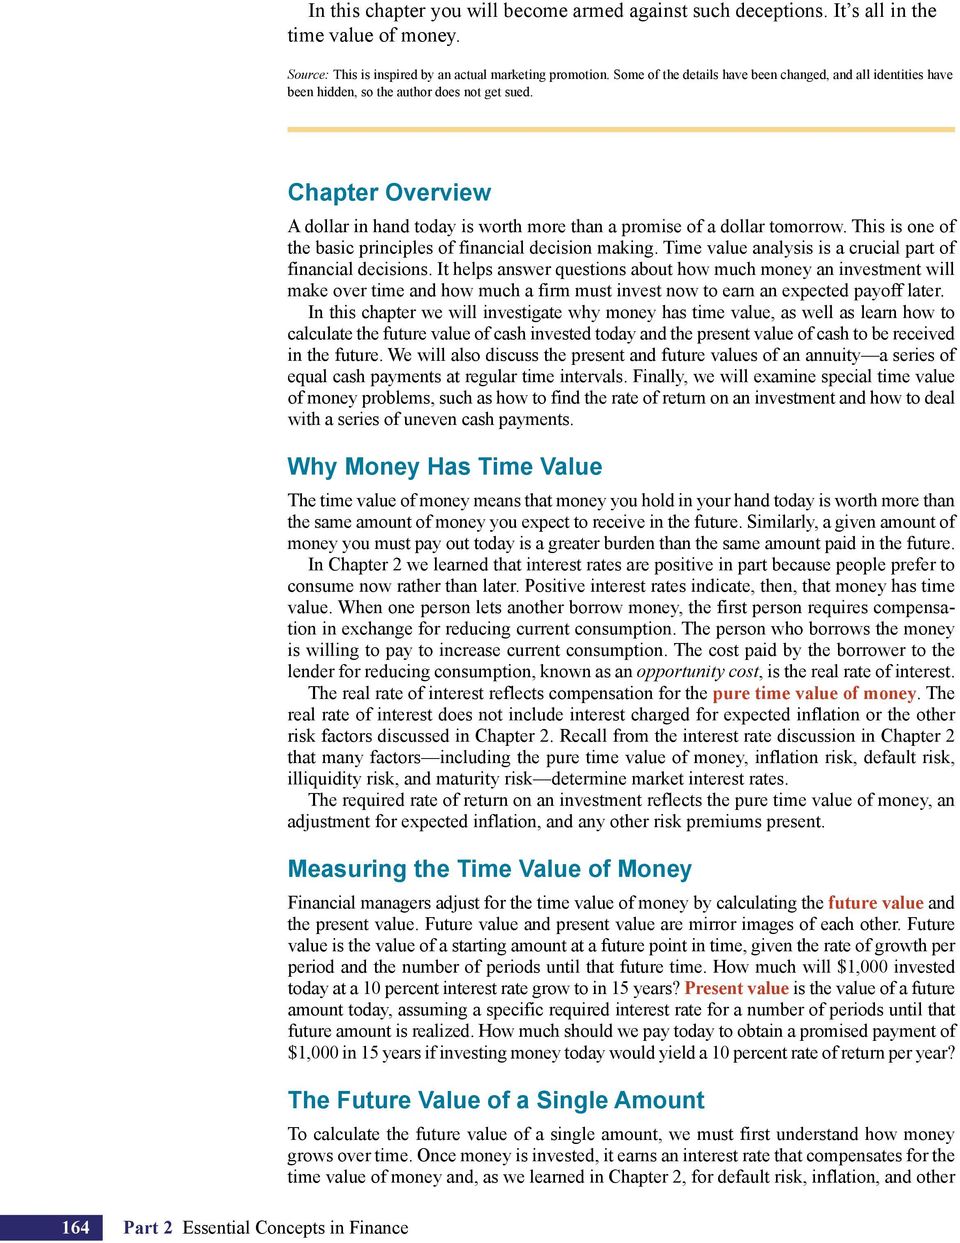 Chapter Overview 64 Part 2 Essential Concepts in Finance A dollar in hand today is worth more than a promise of a dollar tomorrow. This is one of the basic principles of financial decision making.